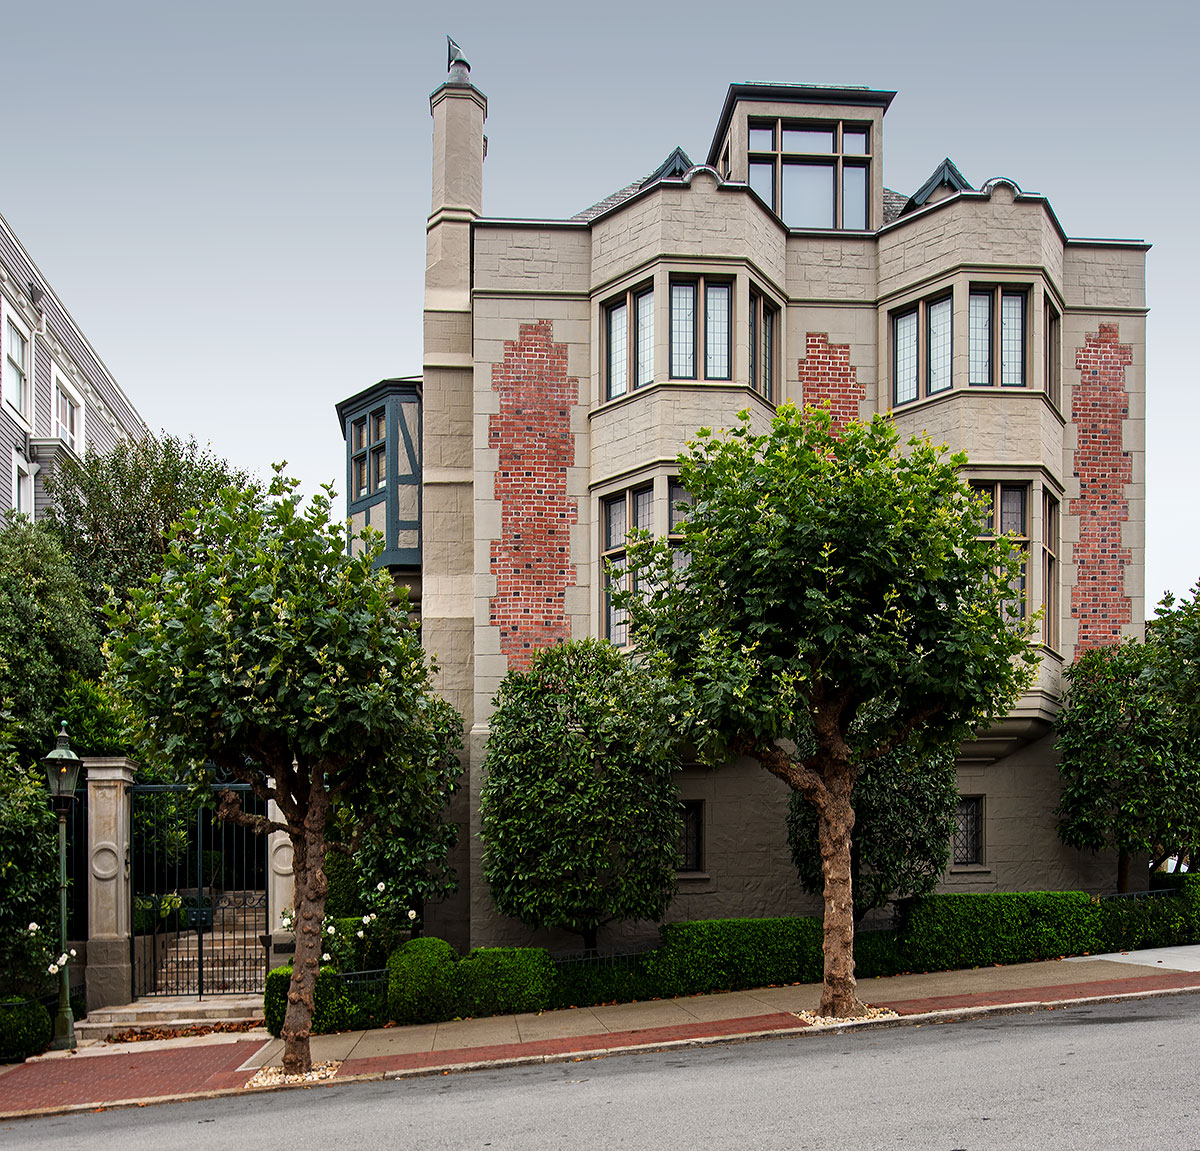 3699 Washington Street in Pacific Heights, designed by Albert L. Farr, built 1929